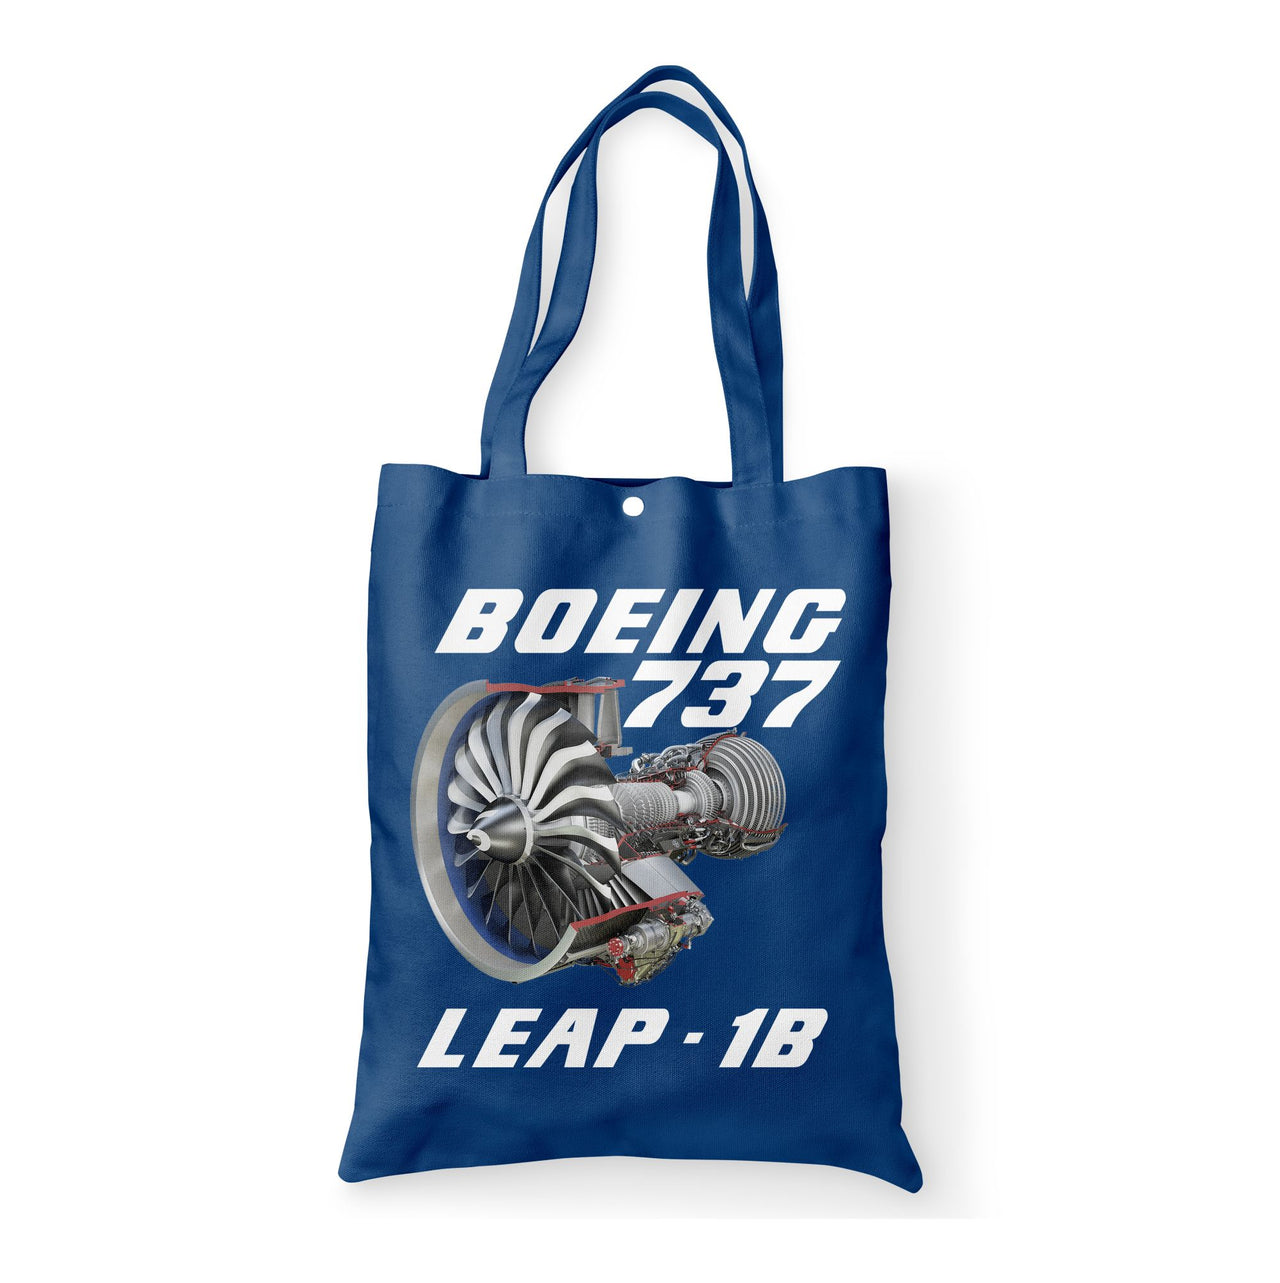 Boeing 737 & Leap 1B Designed Tote Bags